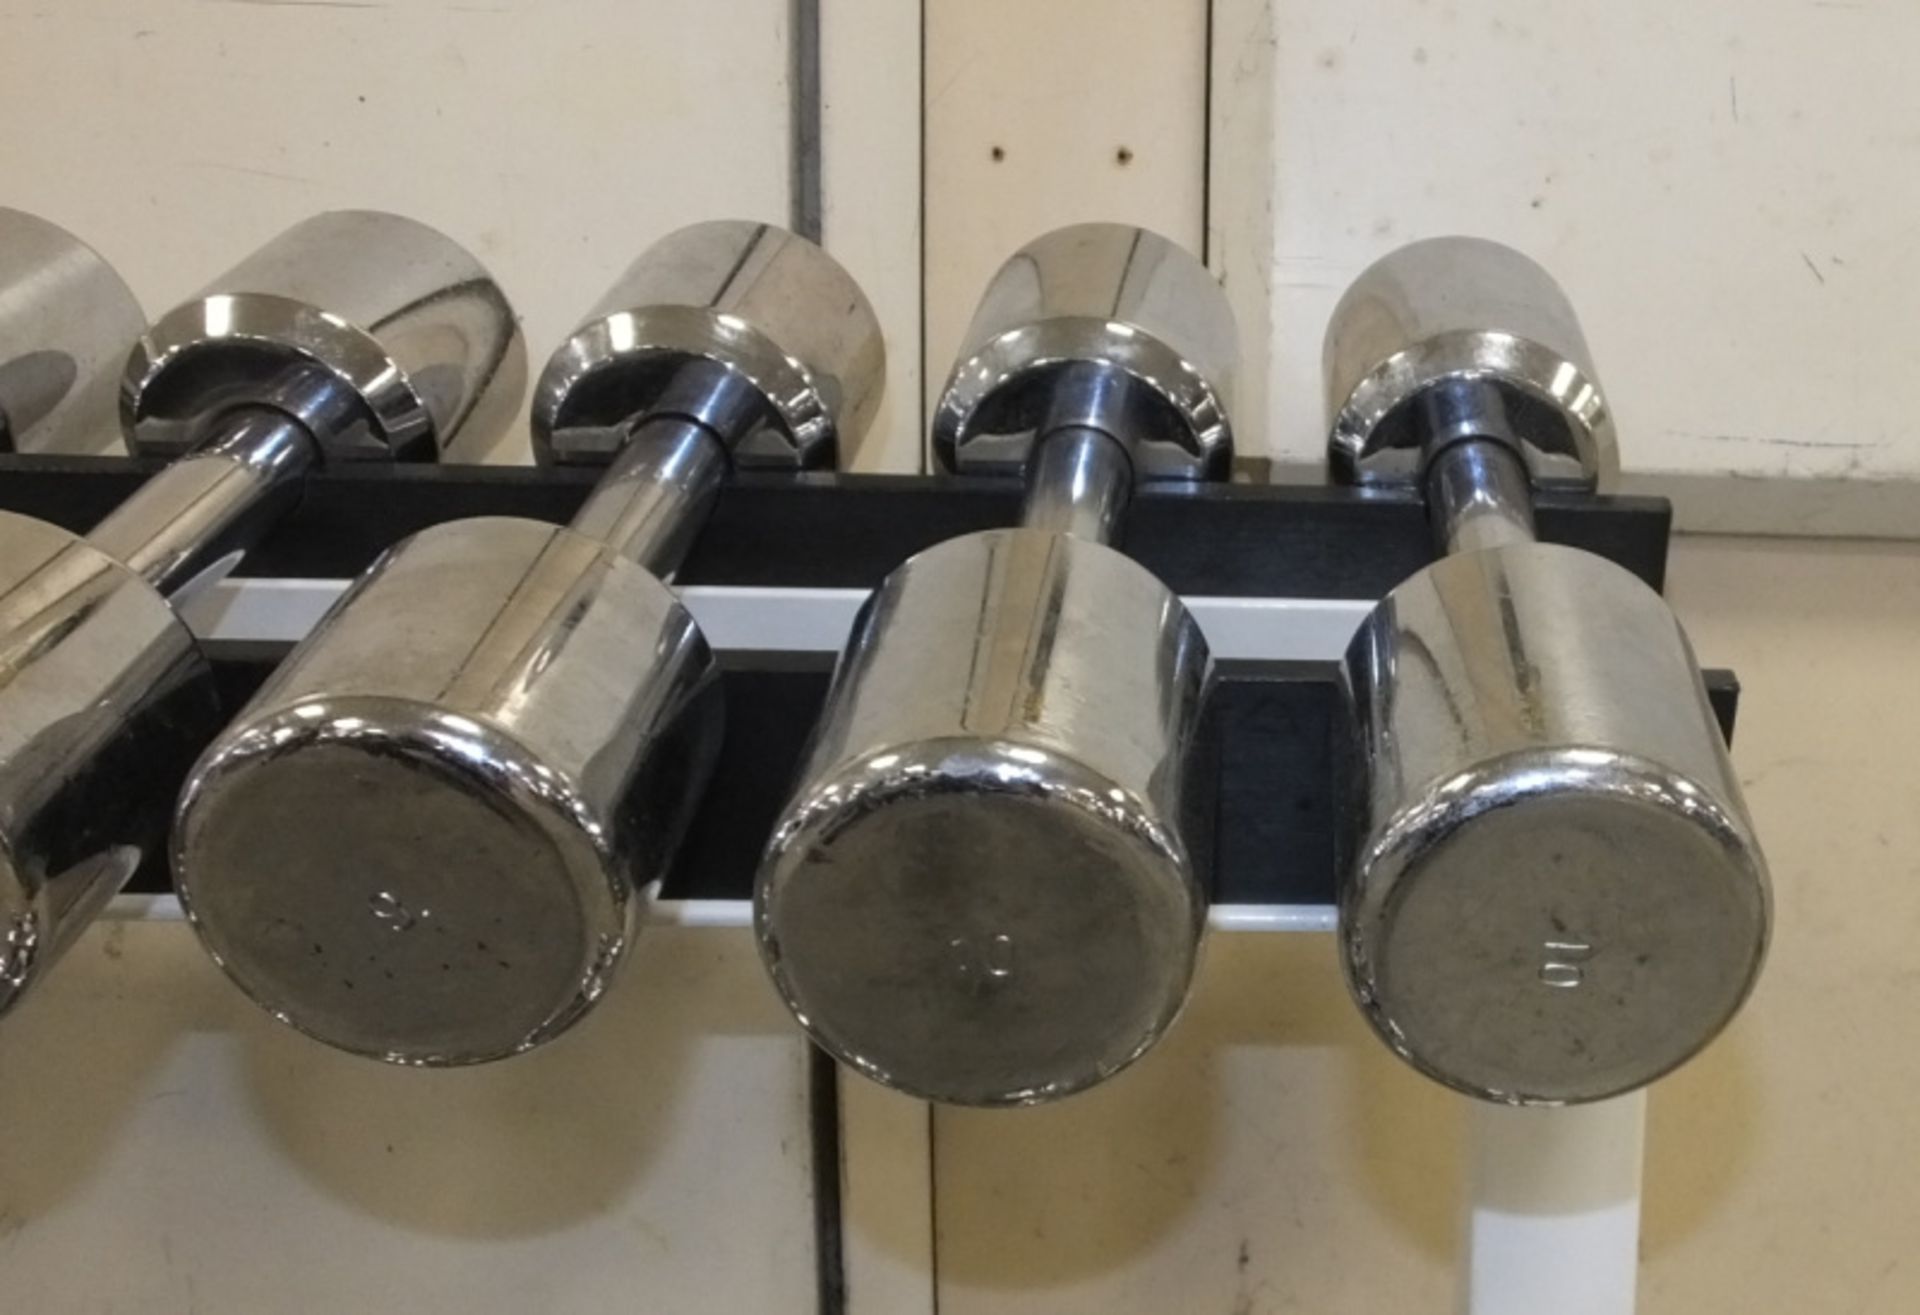 Technogym Dumbbell Rack with Chrome dumbbells (Pairs of 1-10kg) - L1130 x D410 x H765mm (w - Image 4 of 8